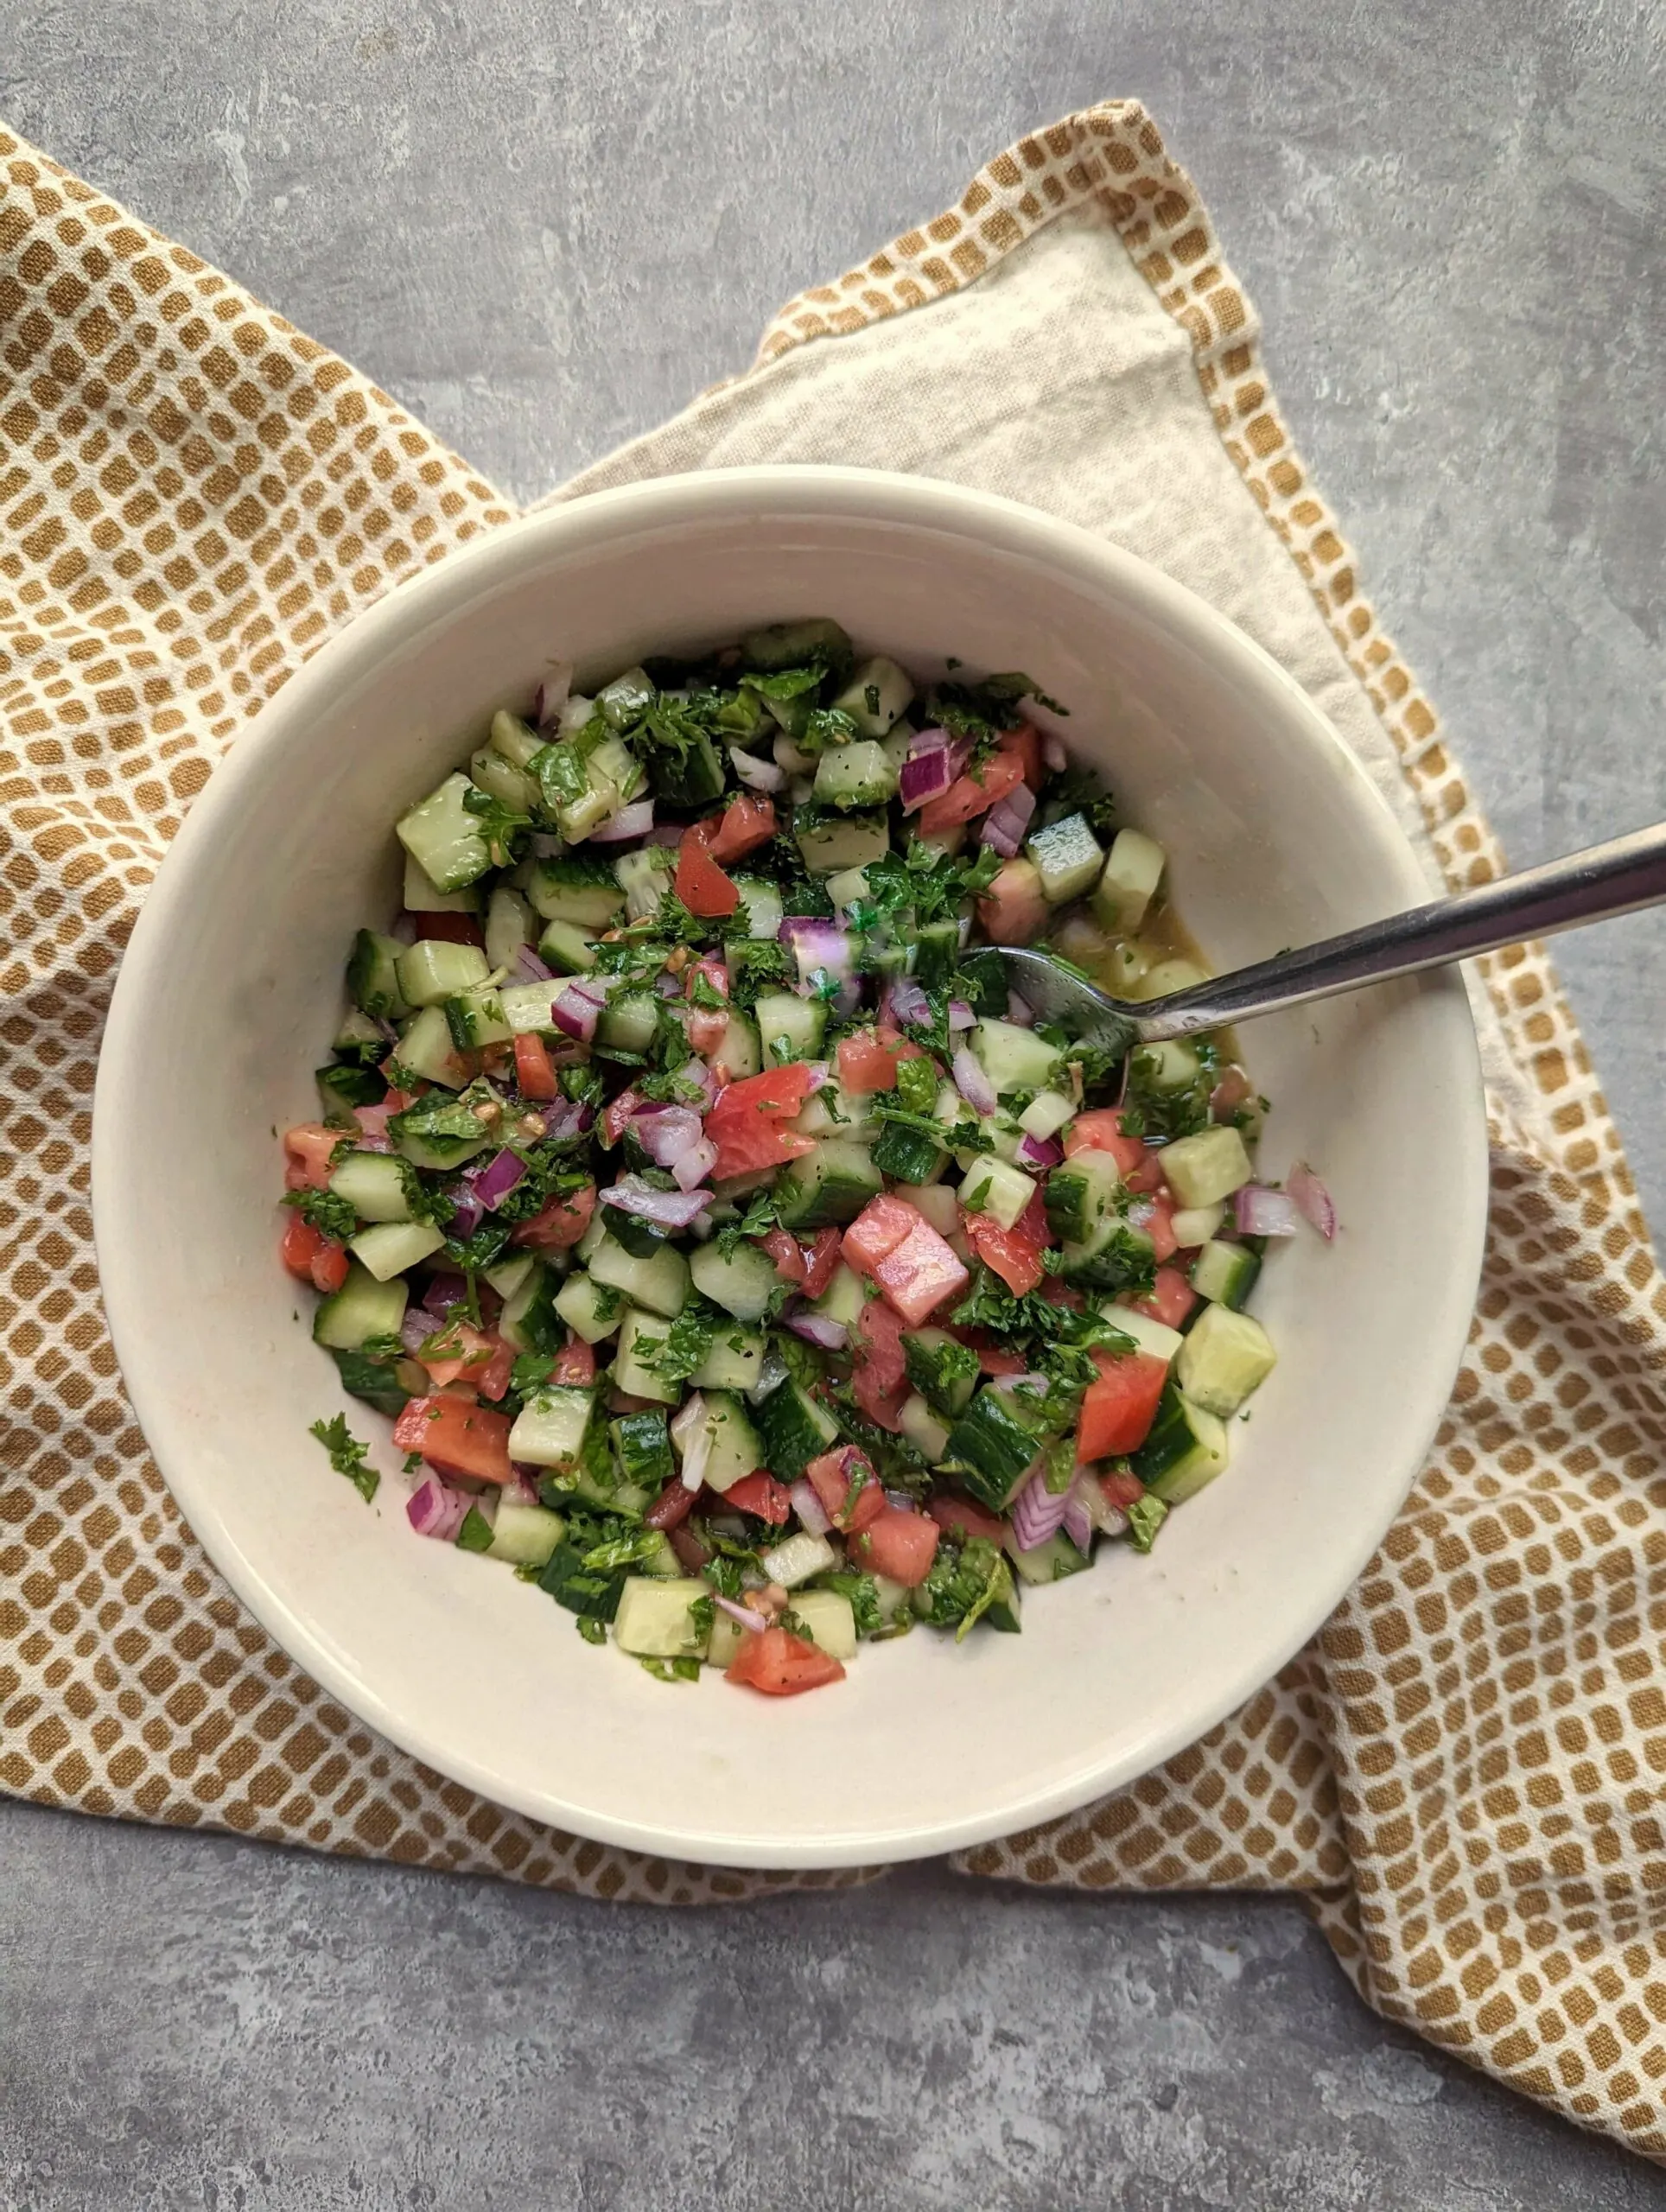 Shirazi salad tossed in a mixing bowl.